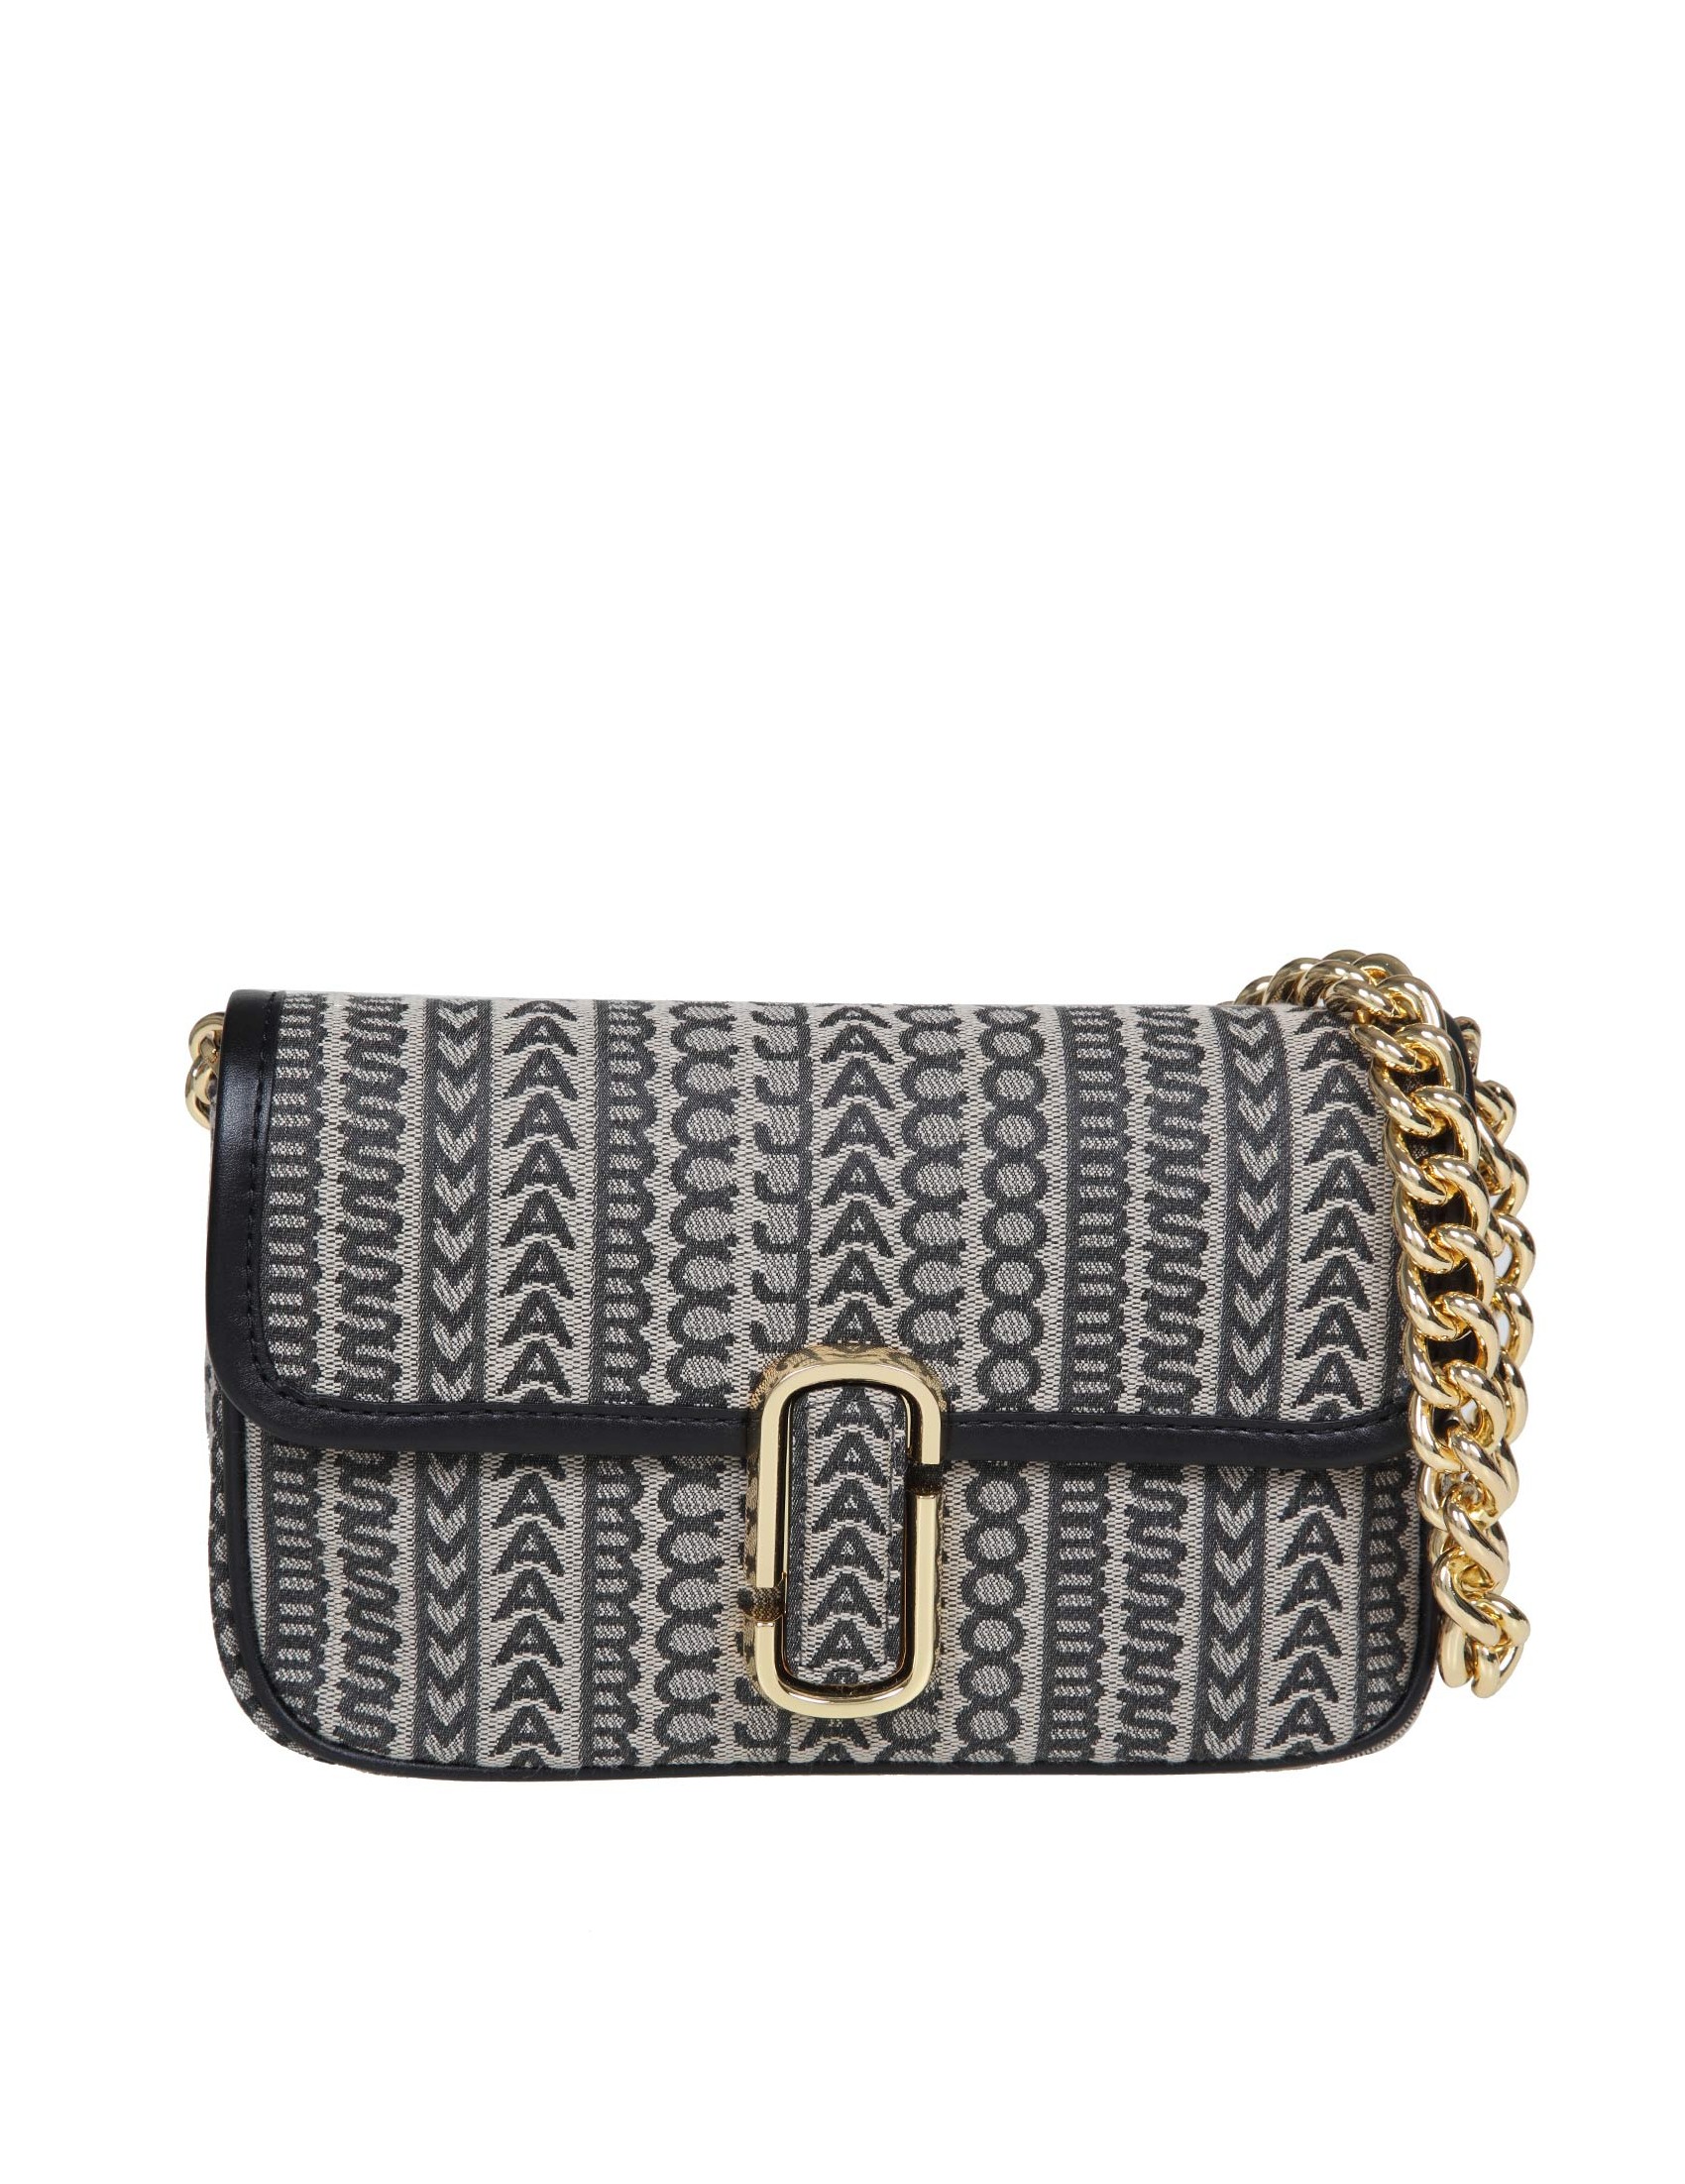 MARC JACOBS SOFT SHOULDER BAG IN EMBROIDERED FABRIC